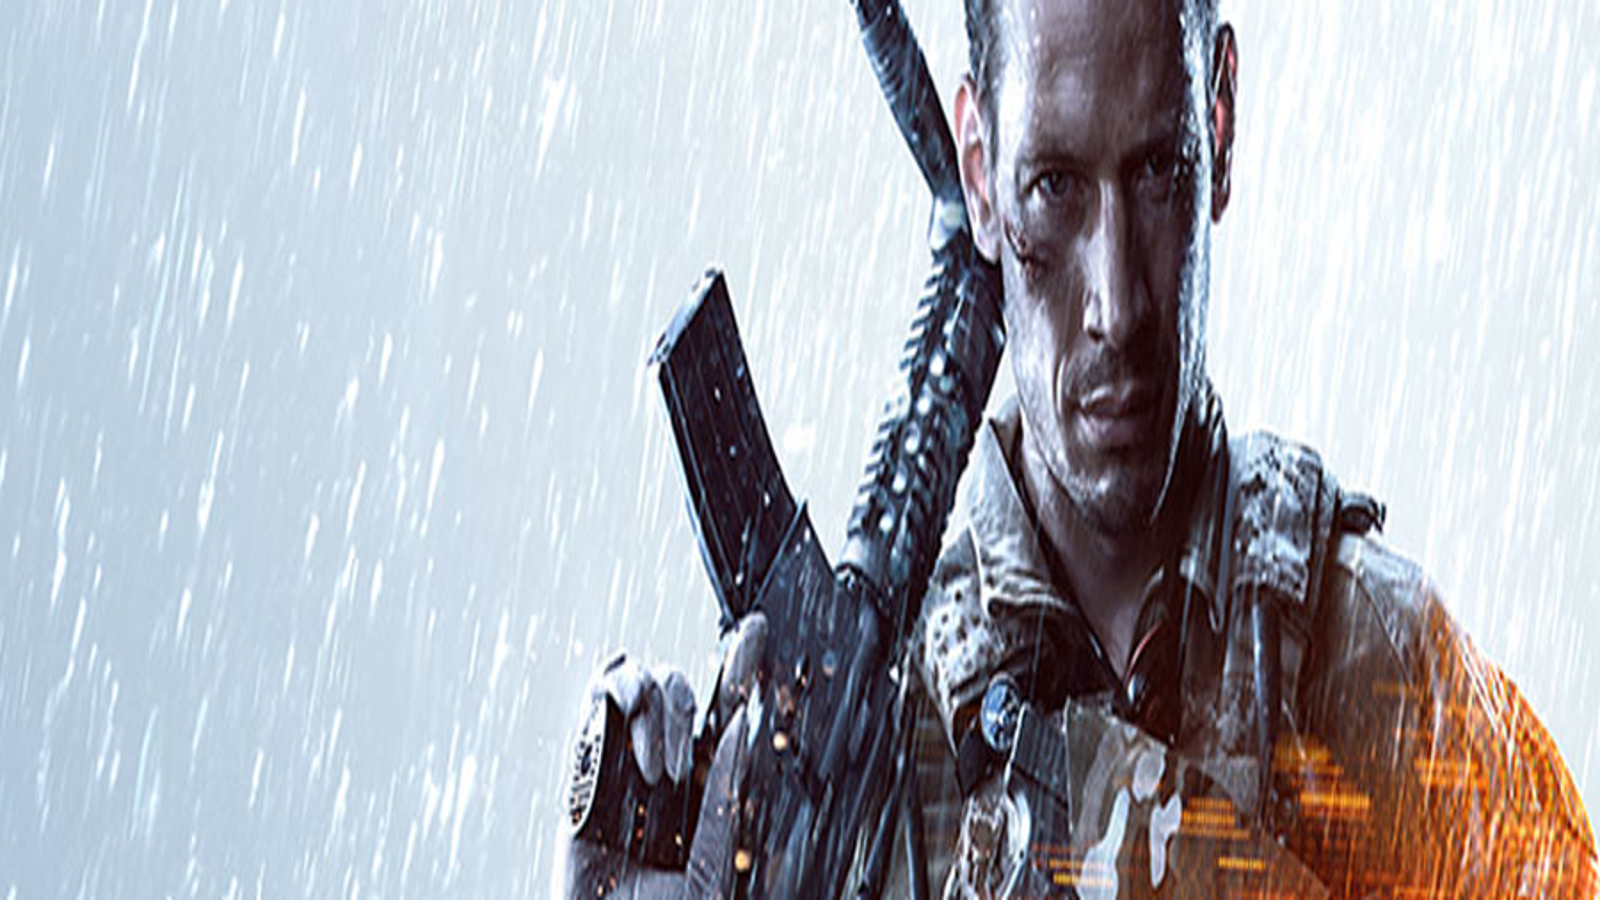 How to Download Battlefield 4 BETA NOW (Xbox 360) 